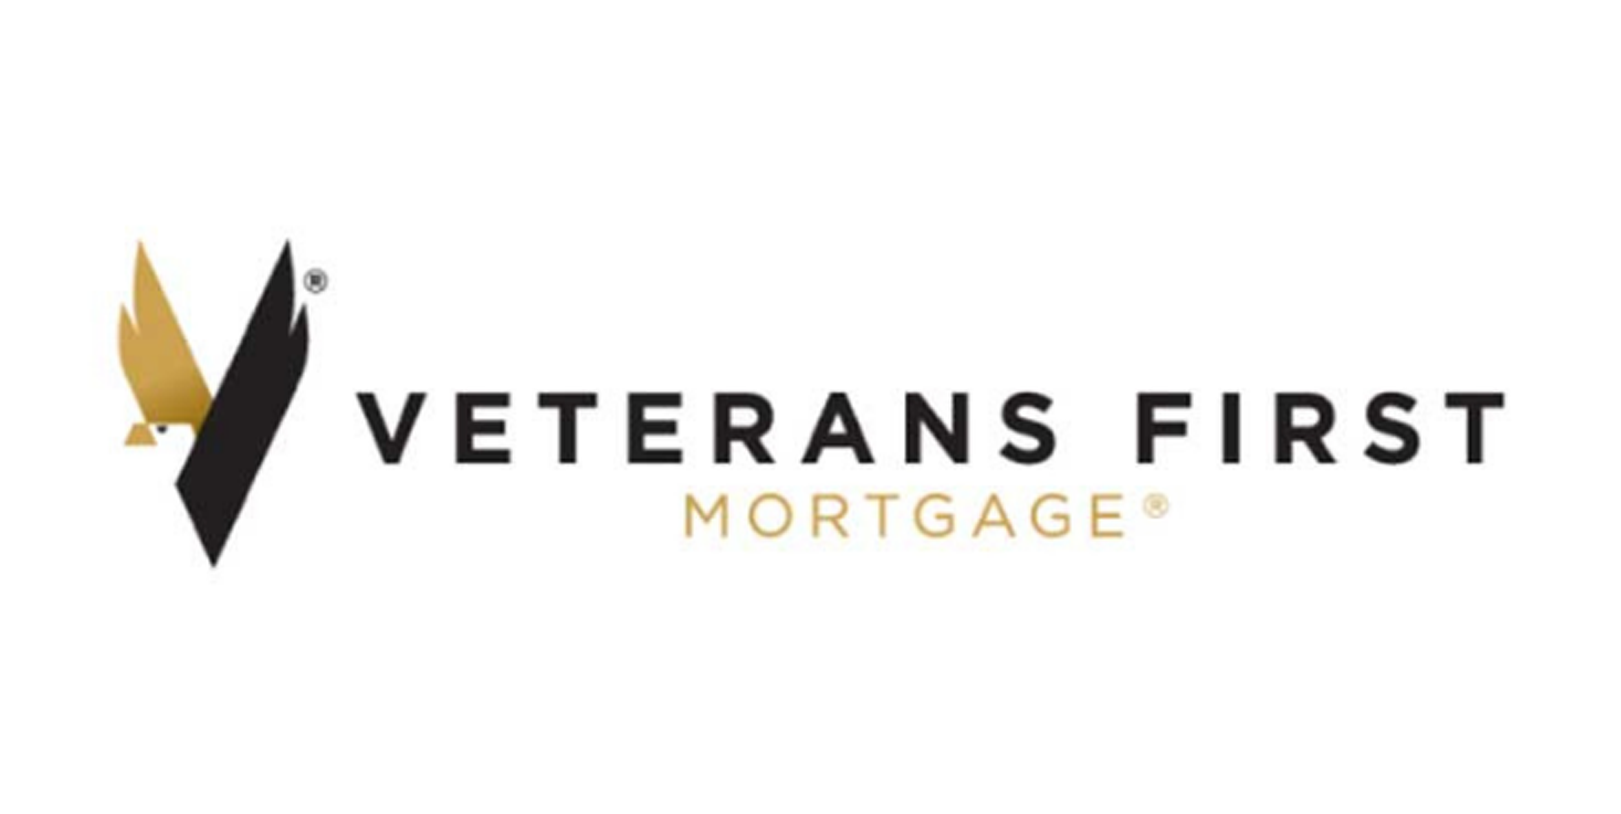 The Malinois Foundation - Trusted Utah Children with Disabilities Veterans First Mortgage